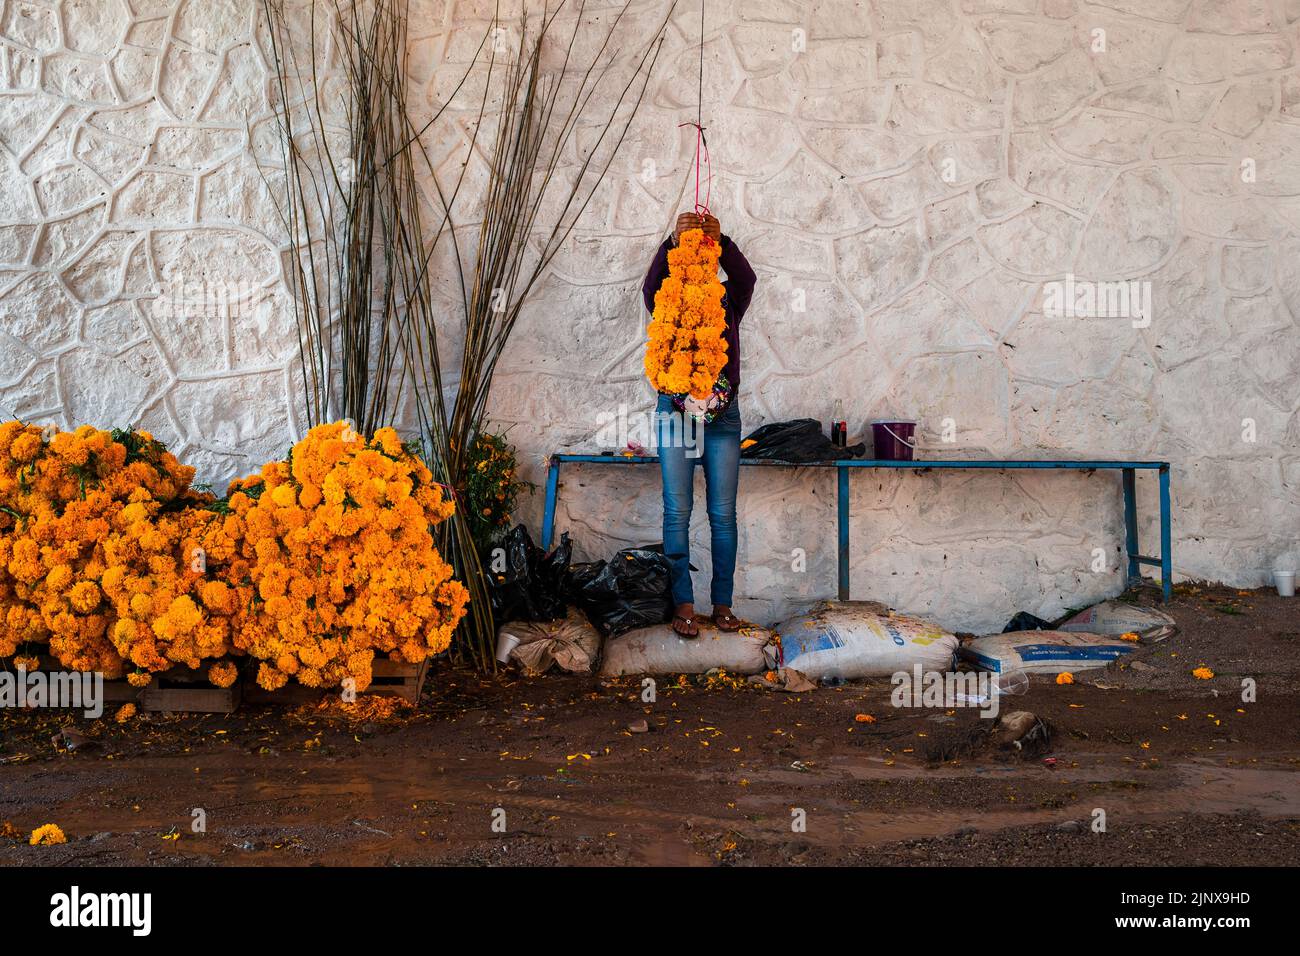 A young Mexican woman sells bunches of marigold flowers for the Day of the Dead celebrations in the market in Tlapa de Comonfort, Mexico. Stock Photo